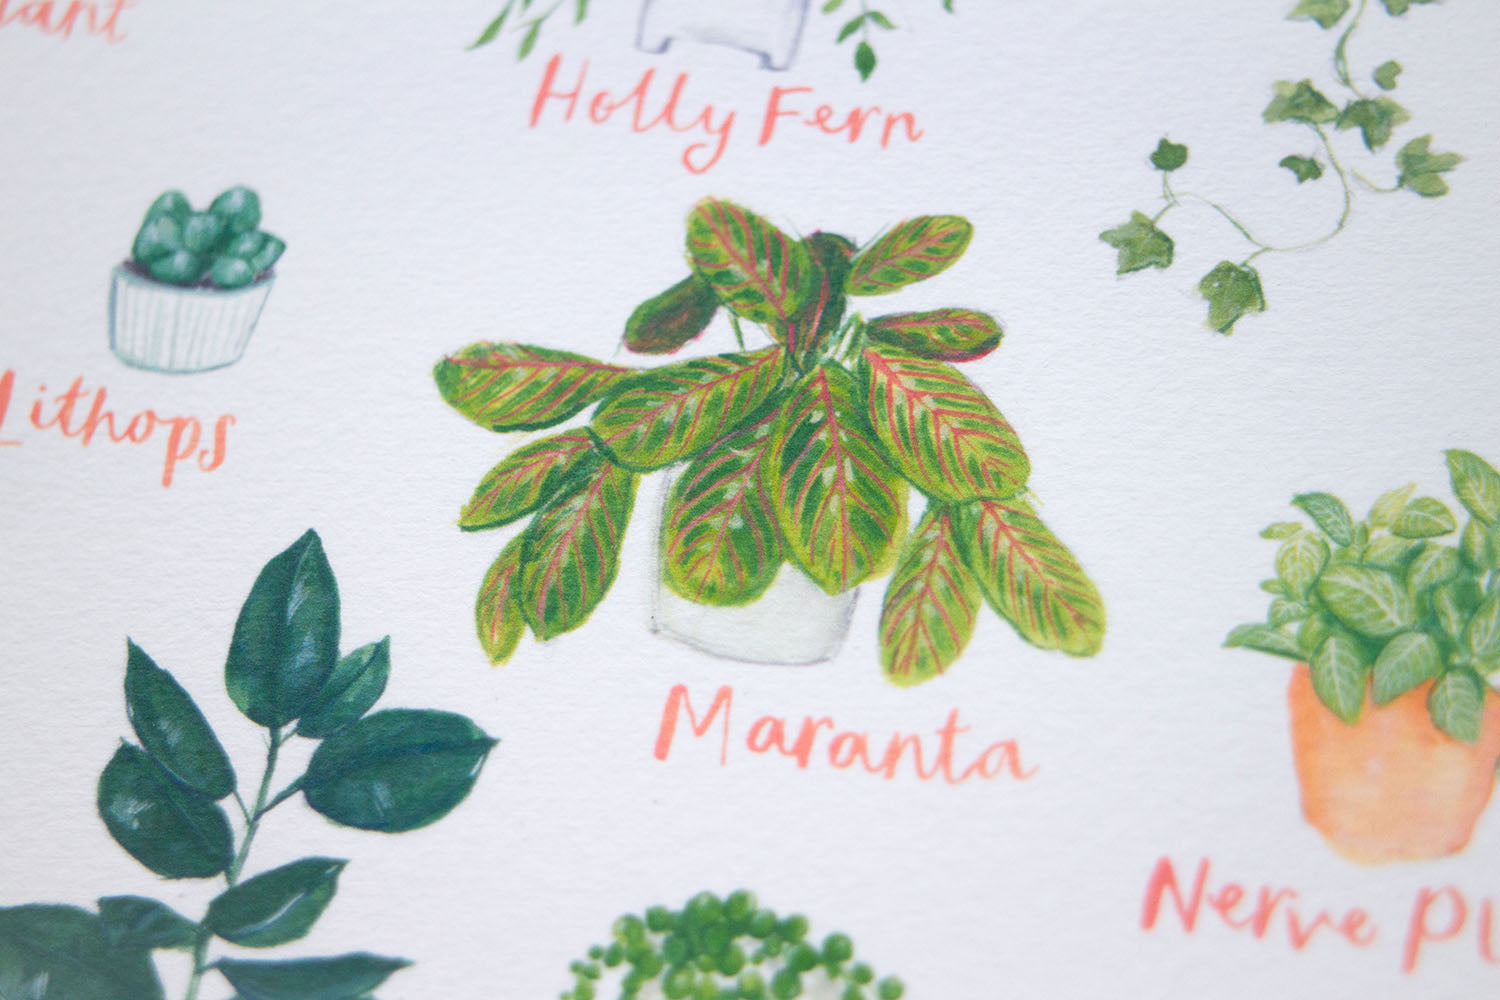 A3 A to Z of House Plants Art Print